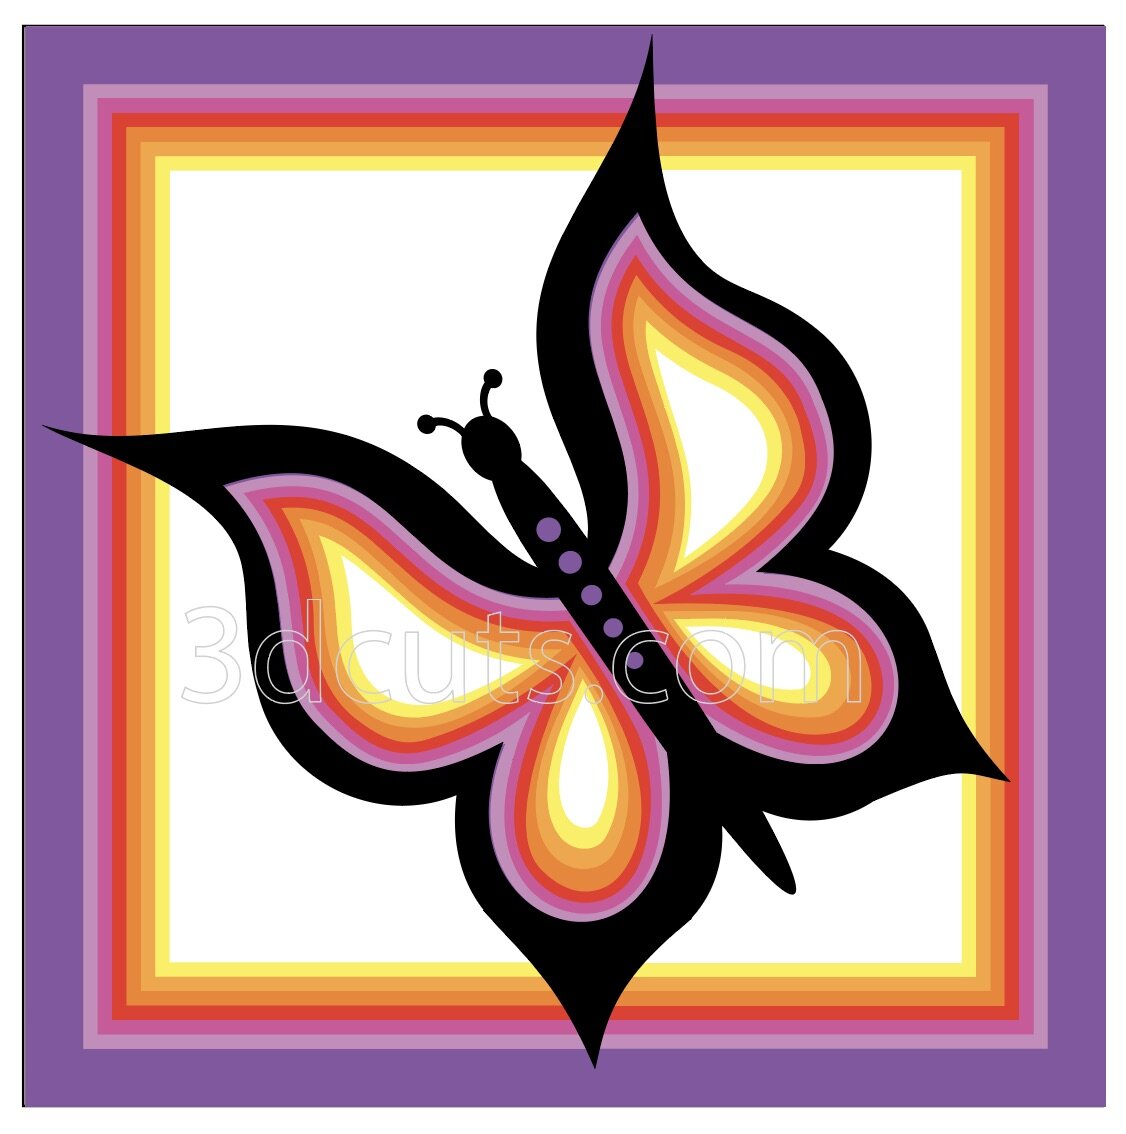 Download Stacked Butterfly Tutorial 3dcuts Com SVG, PNG, EPS, DXF File